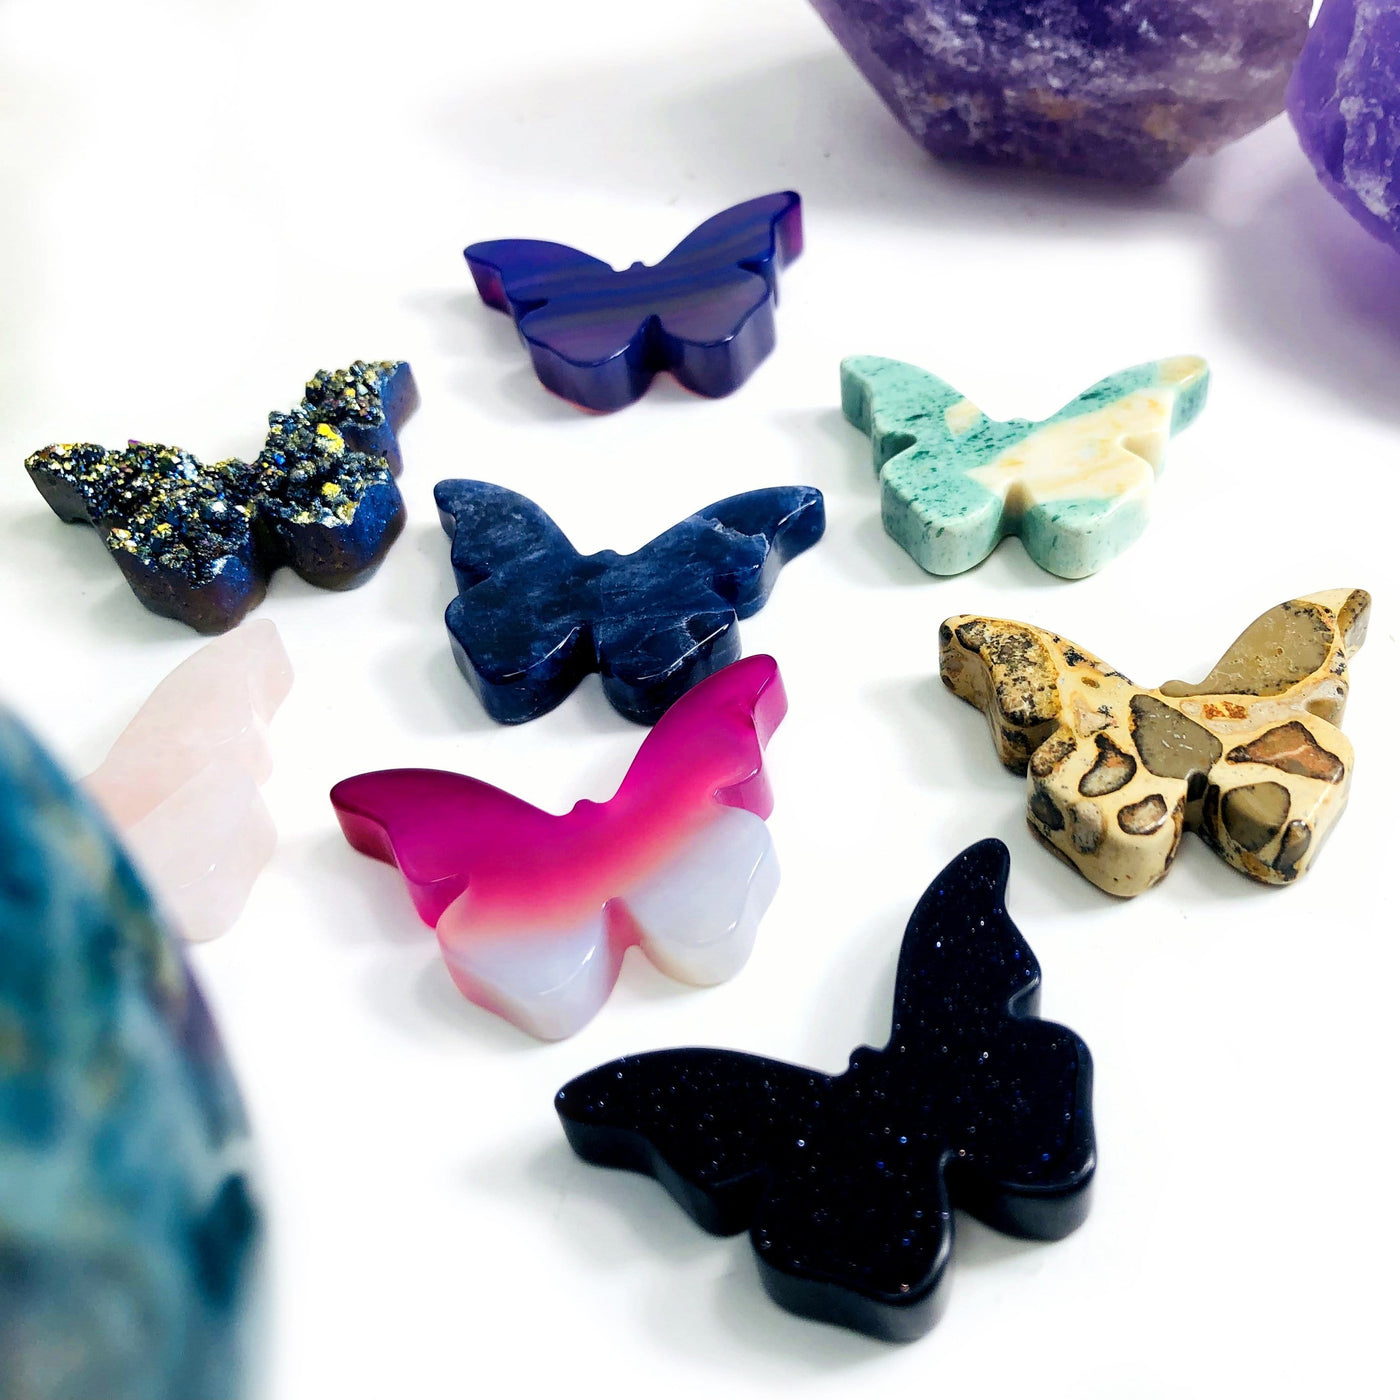 Up close view of each Butterfly Gemstone Cabochon displayed on a white surface